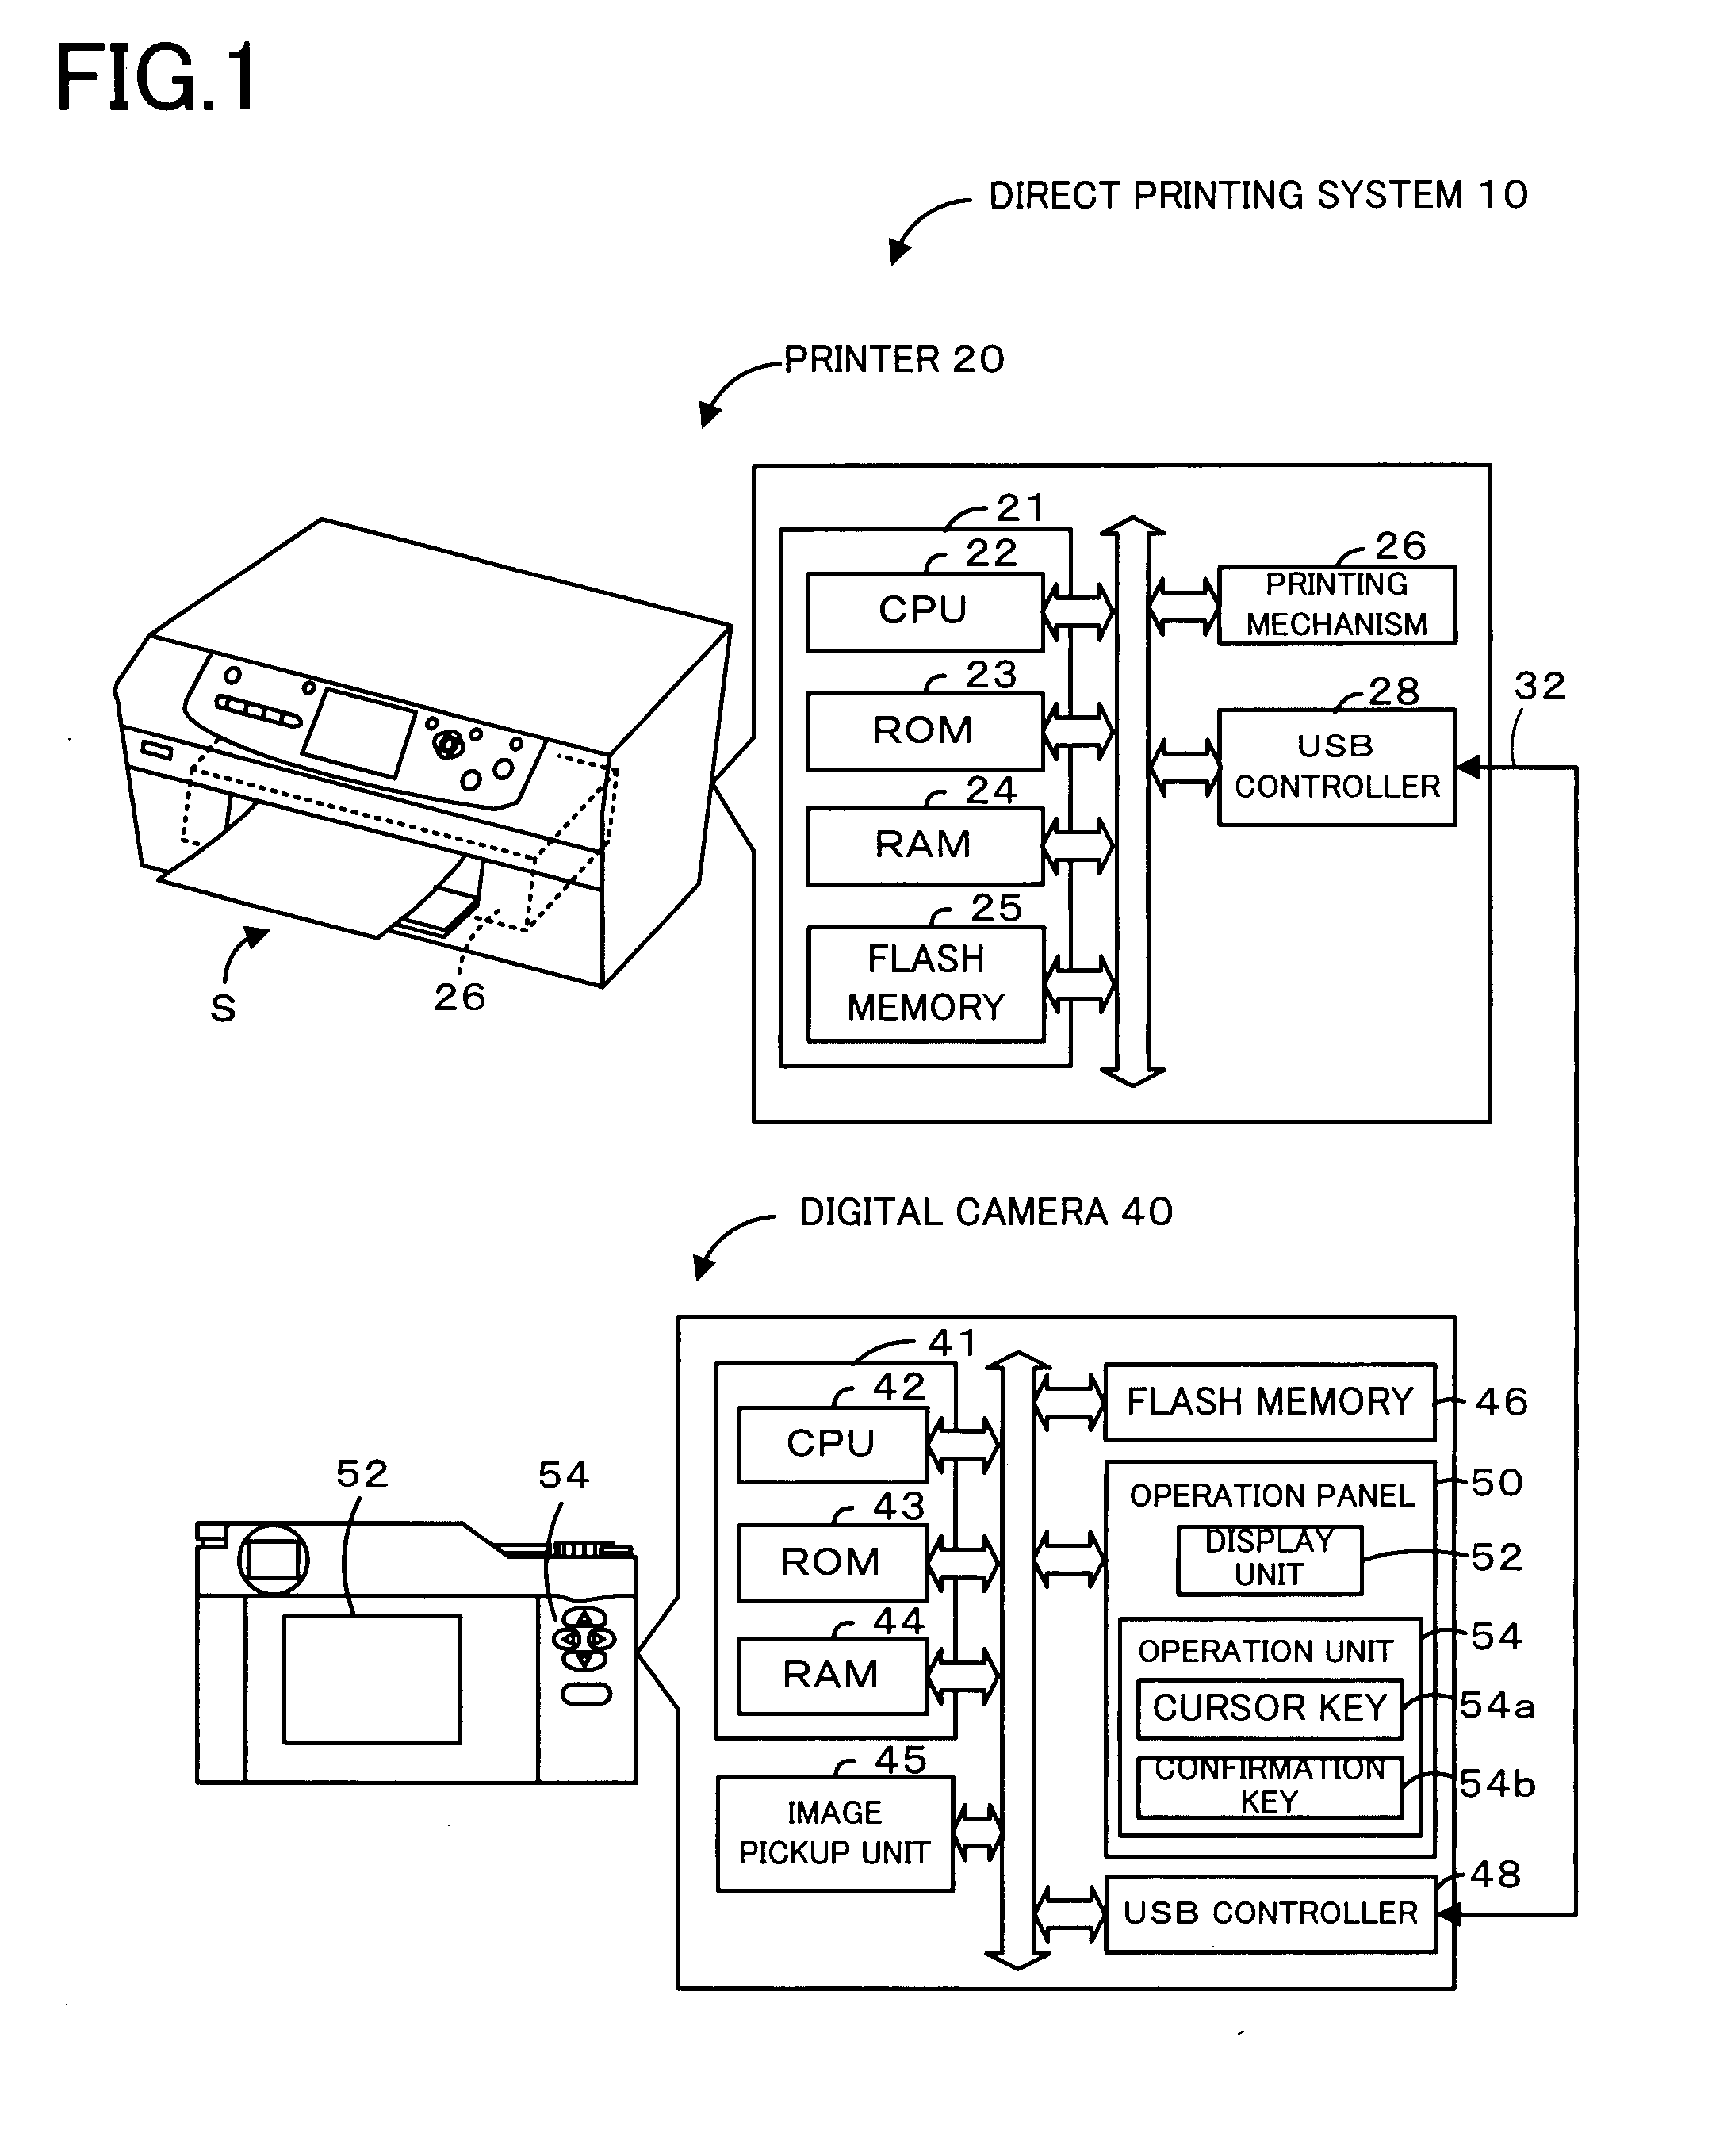 Image output device, image processing apparatus, image output and image processing system, and method therefore